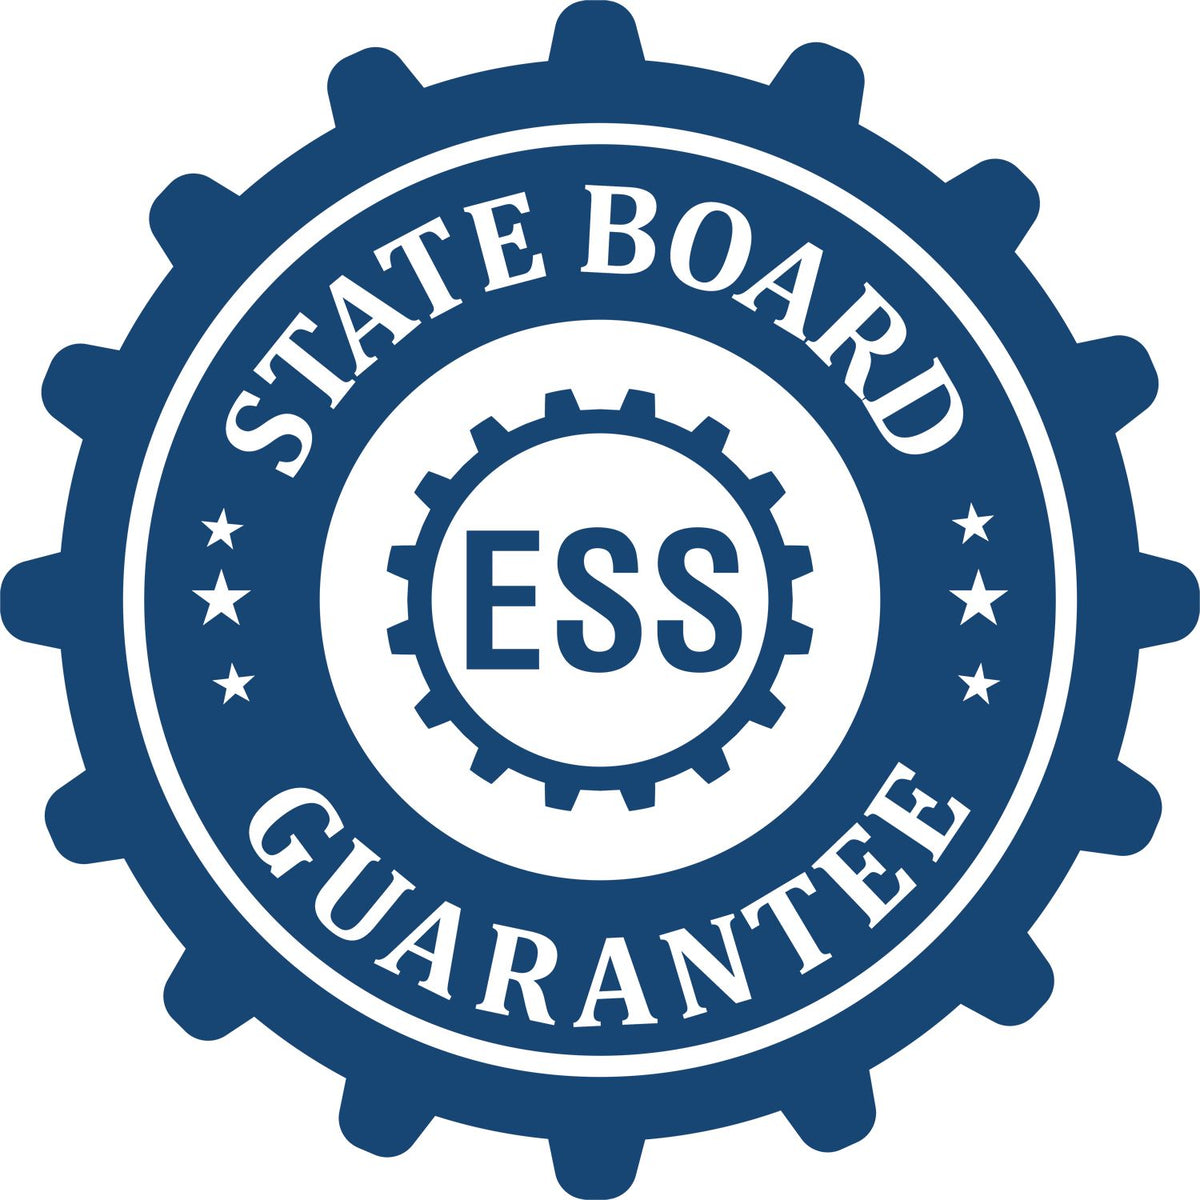 An emblem in a gear shape illustrating a state board guarantee for the Arizona Desk Architect Embossing Seal product.